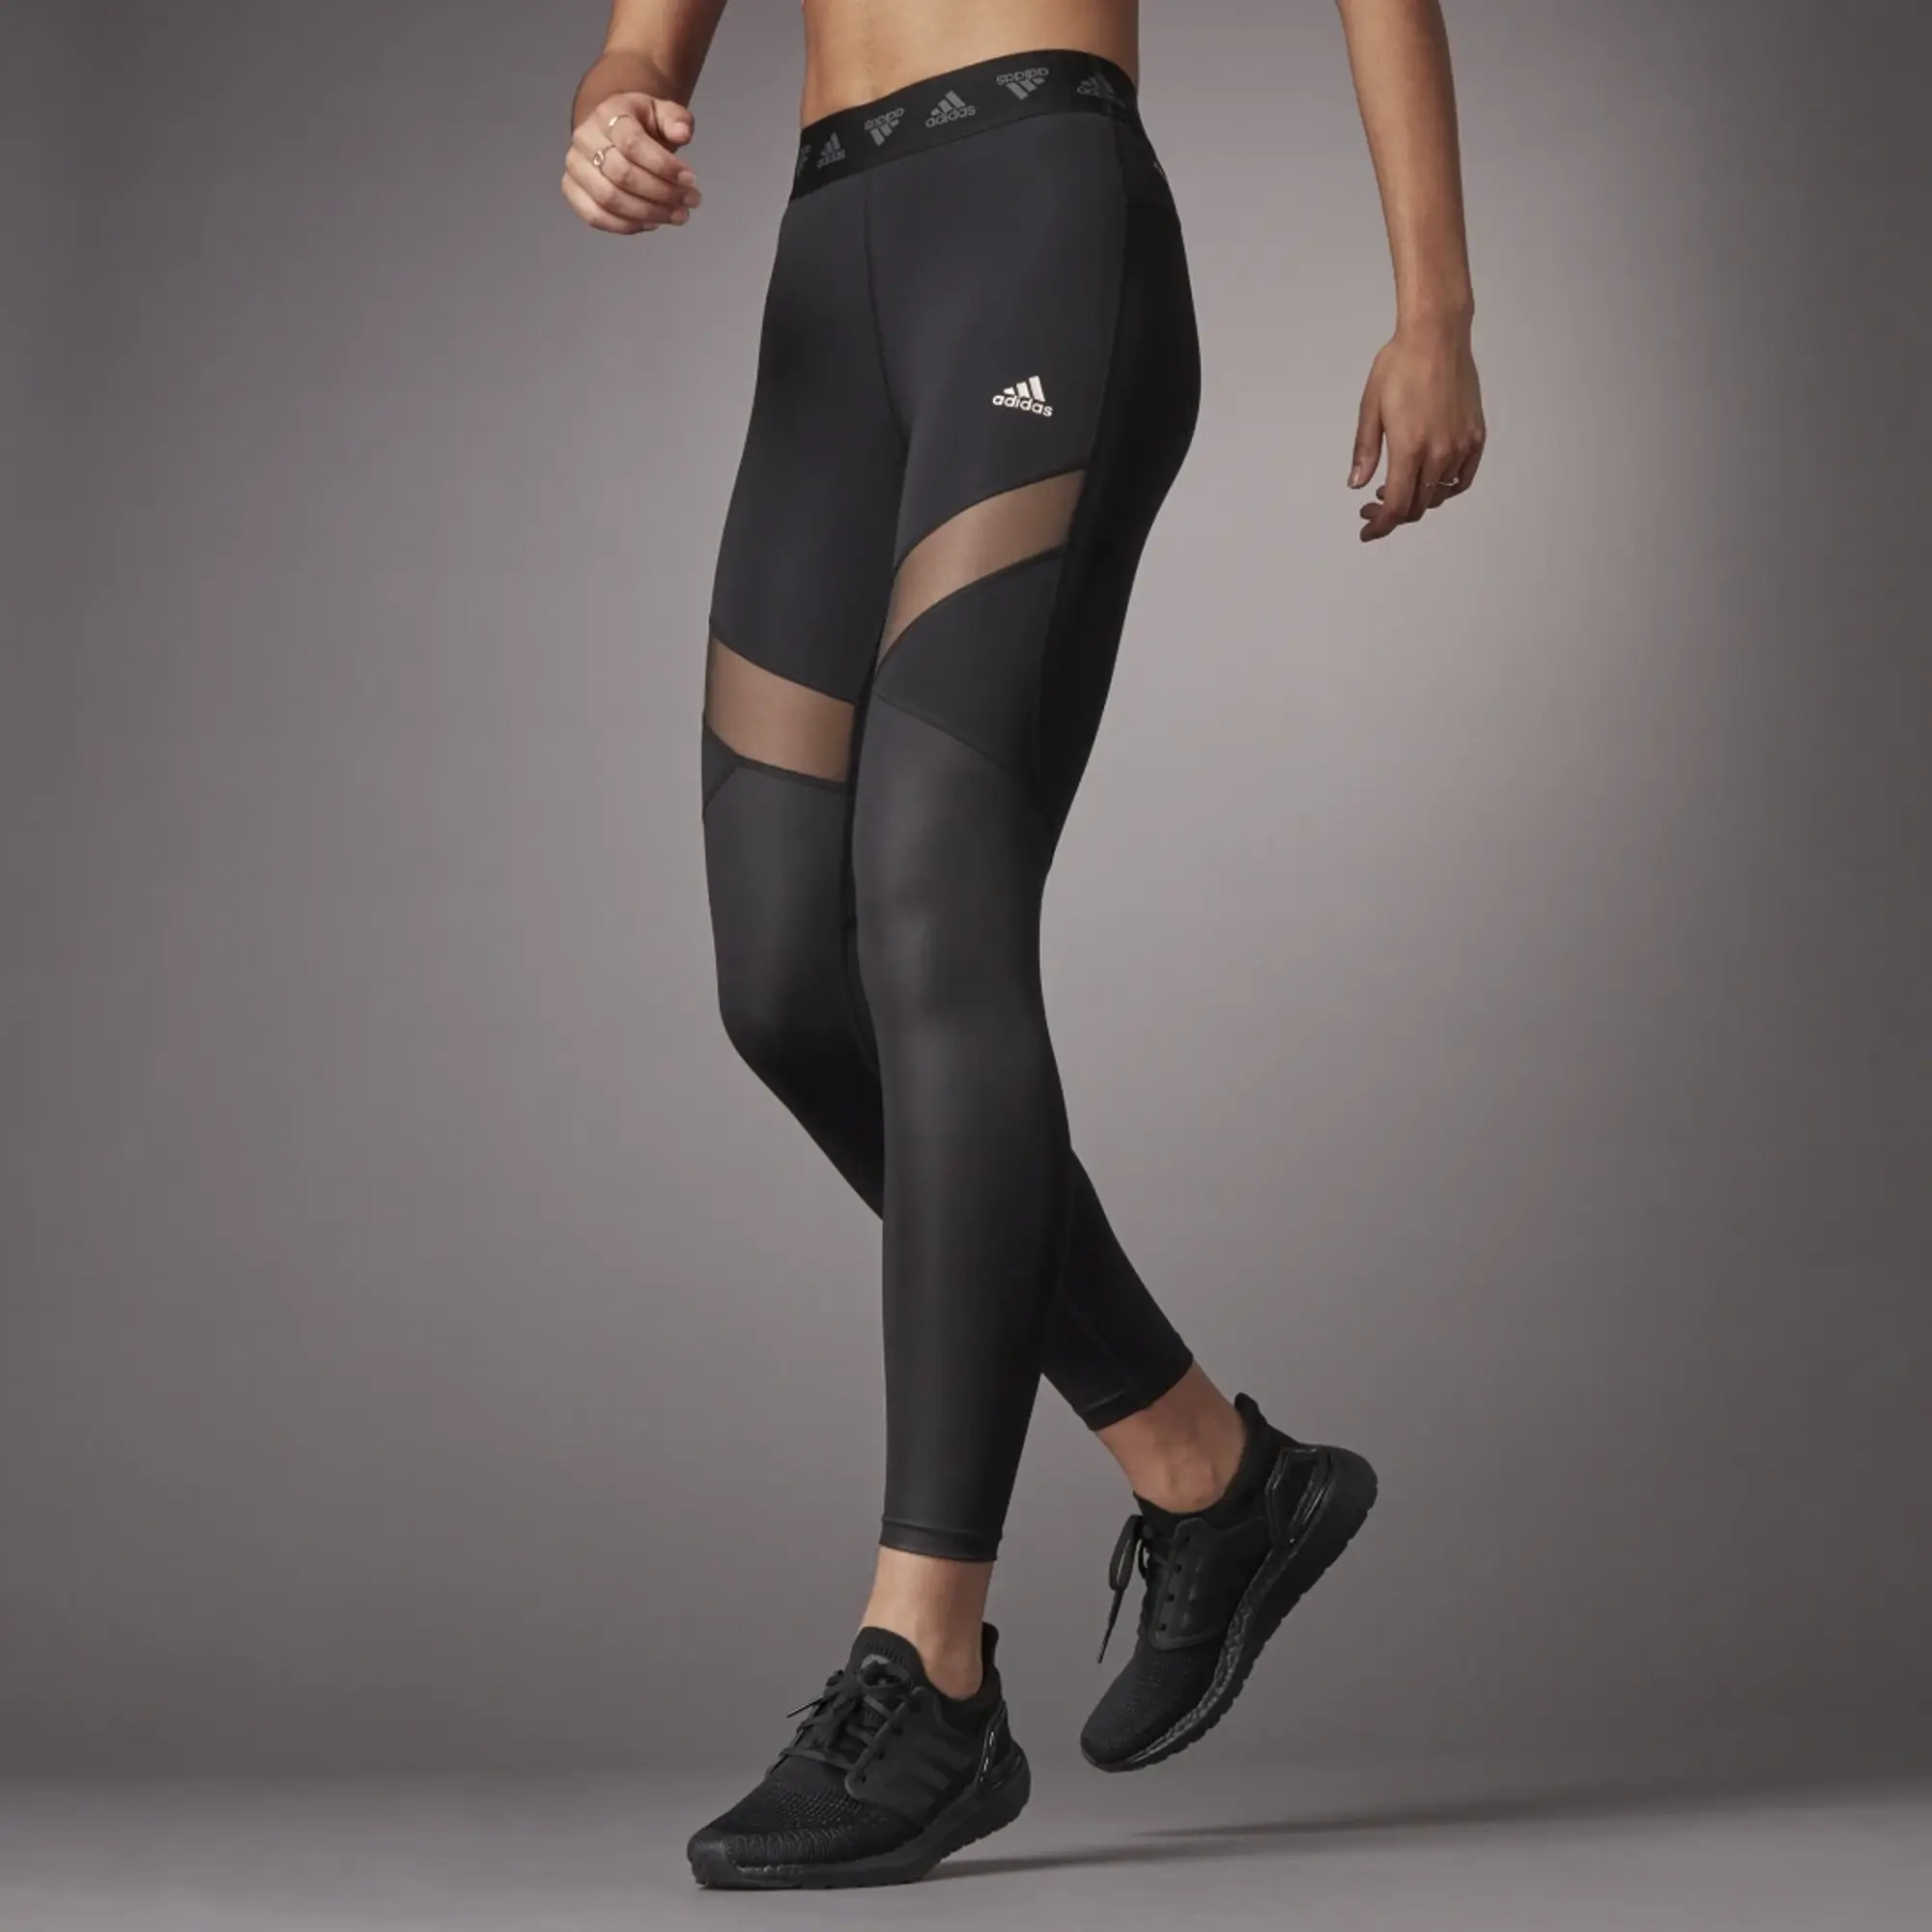 Adidas Training Leggings With Branded Waistband In Black, HE9403